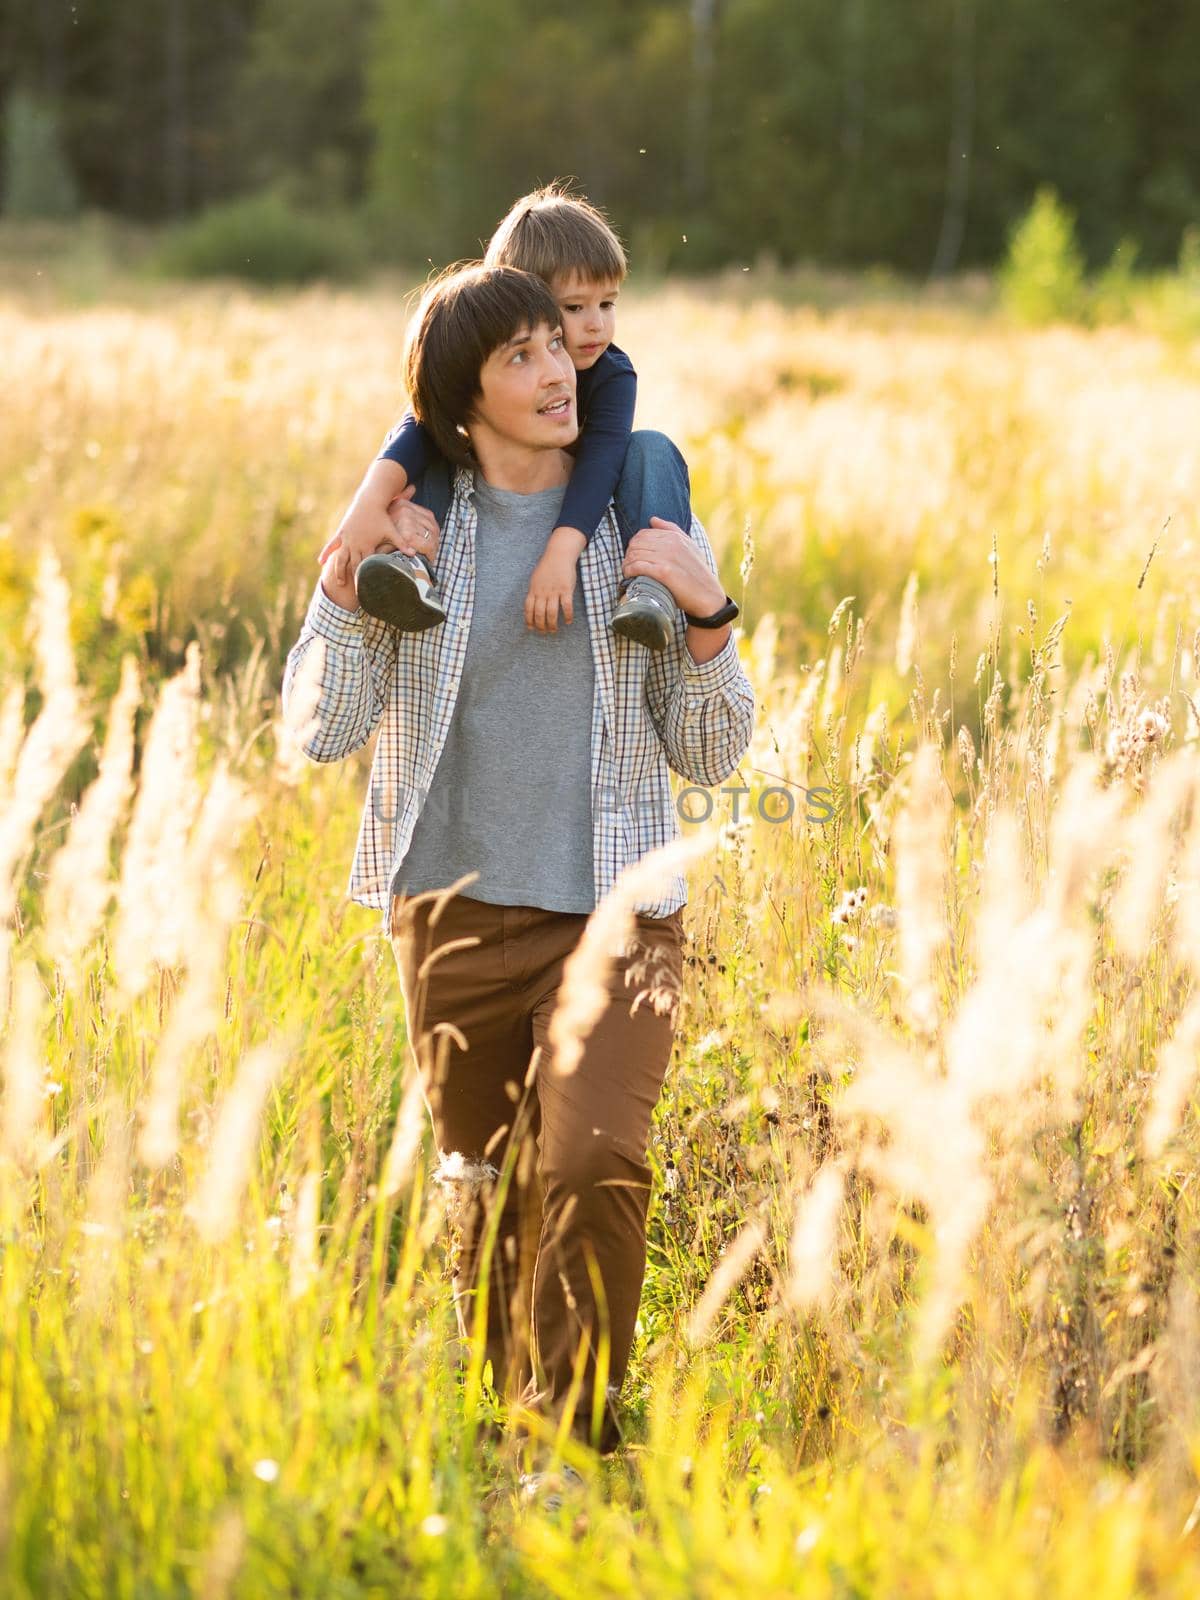 Father carries his son on shoulders. Family time outdoors. Man with child on autumn field at sunset. Dad and son explores nature together.